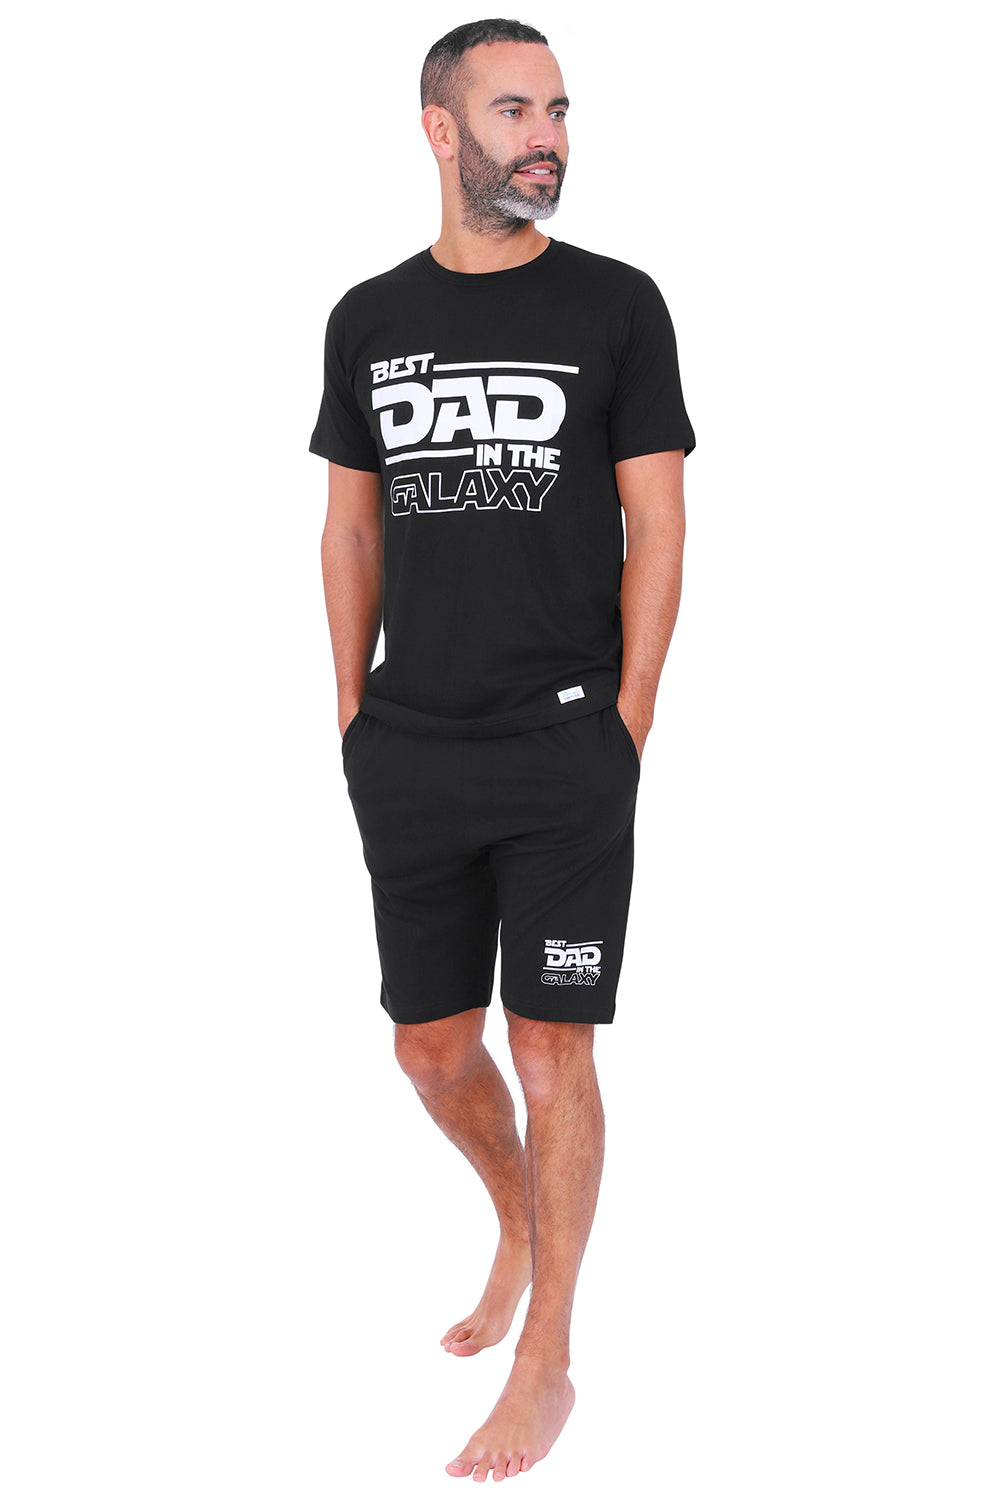 Mens 'Best Dad In The Galaxy' Short Pyjamas Fathers Day